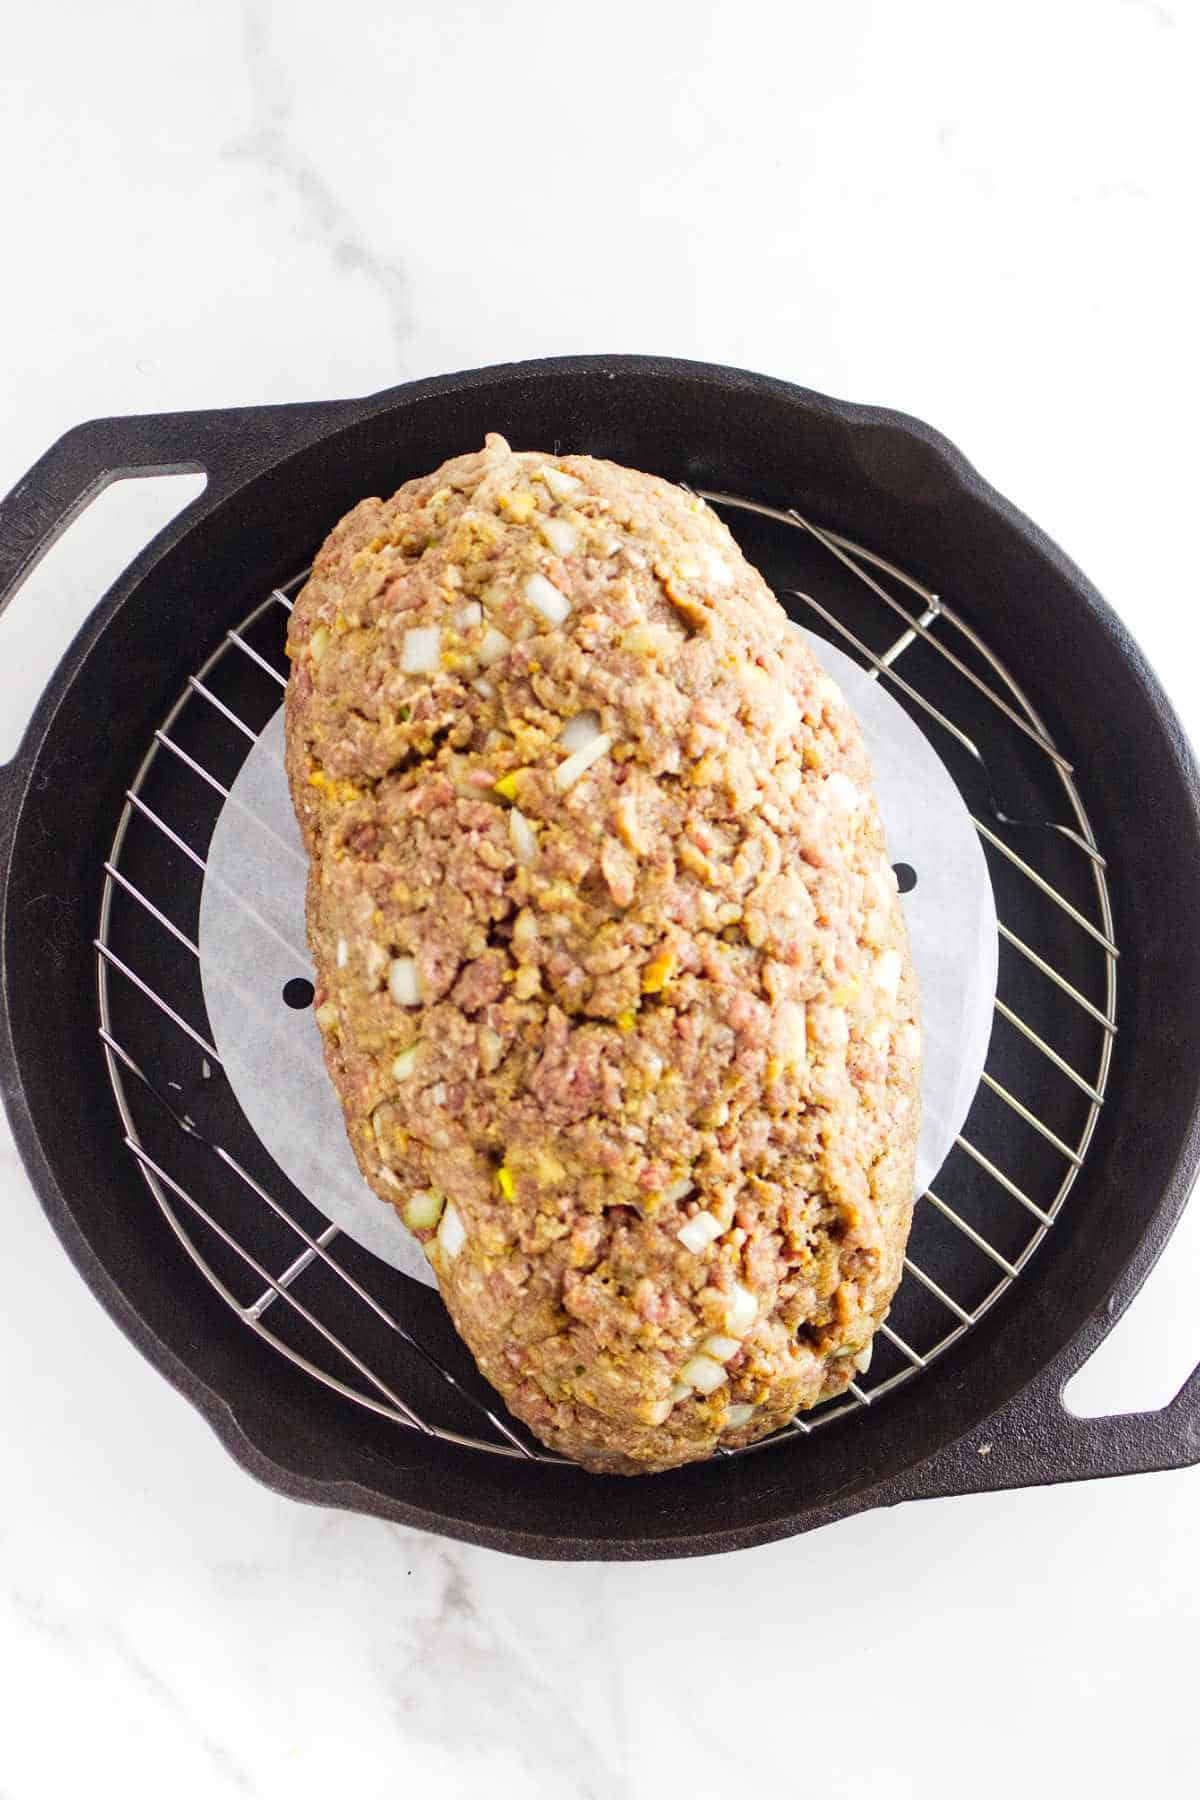 shaped seasoned minced beef on a grilling rack in a cast iron skillet.